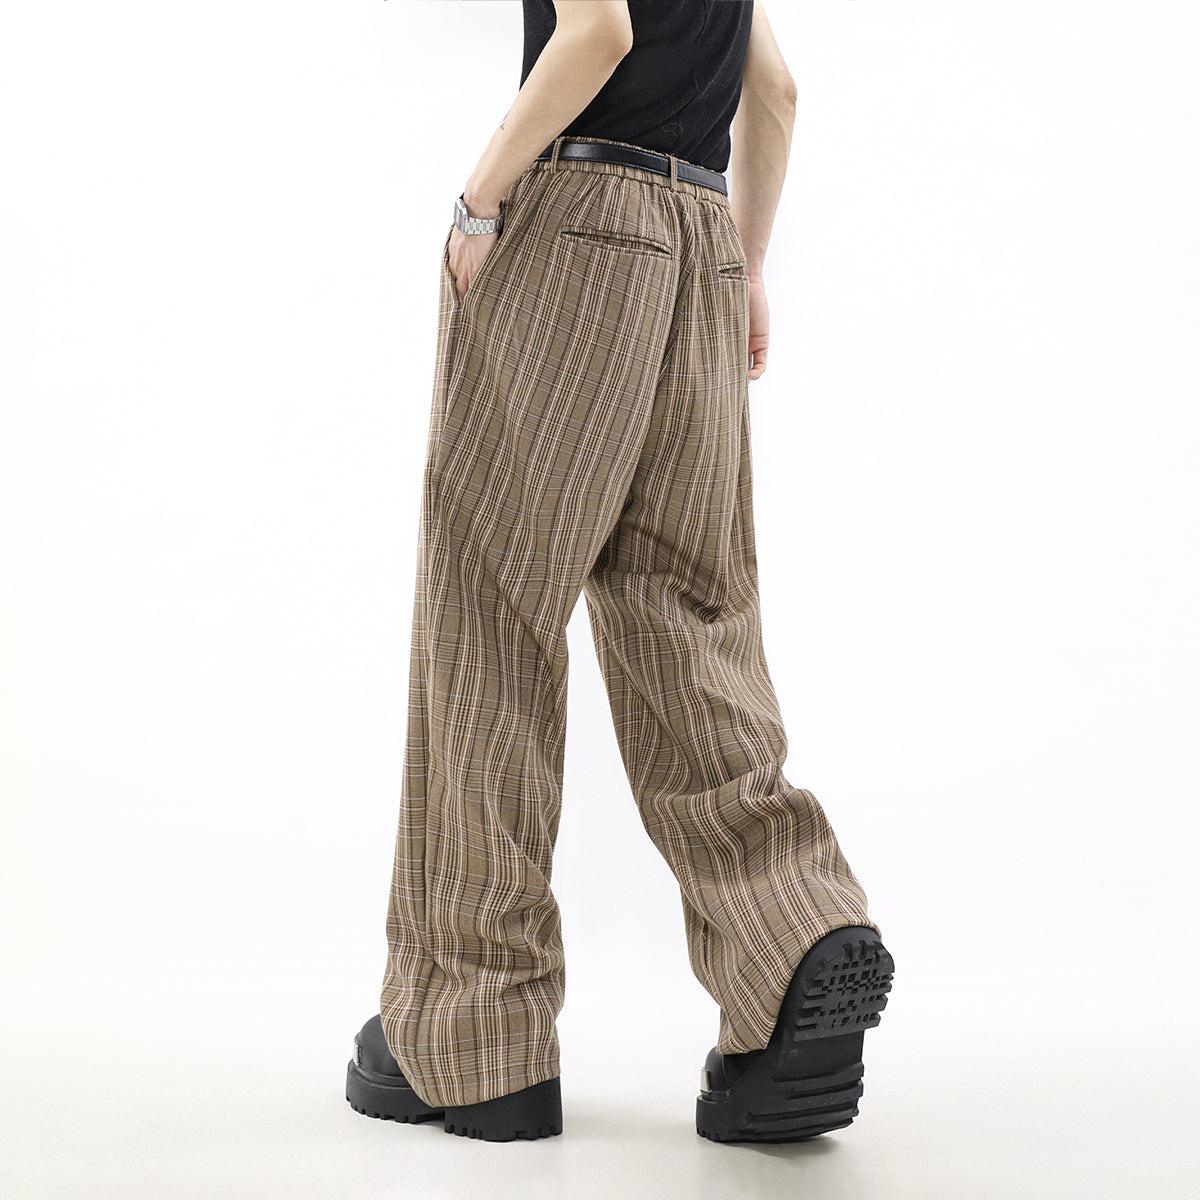 Mr Nearly Classic Plaid Slant Pocket Pants Korean Street Fashion Pants By Mr Nearly Shop Online at OH Vault